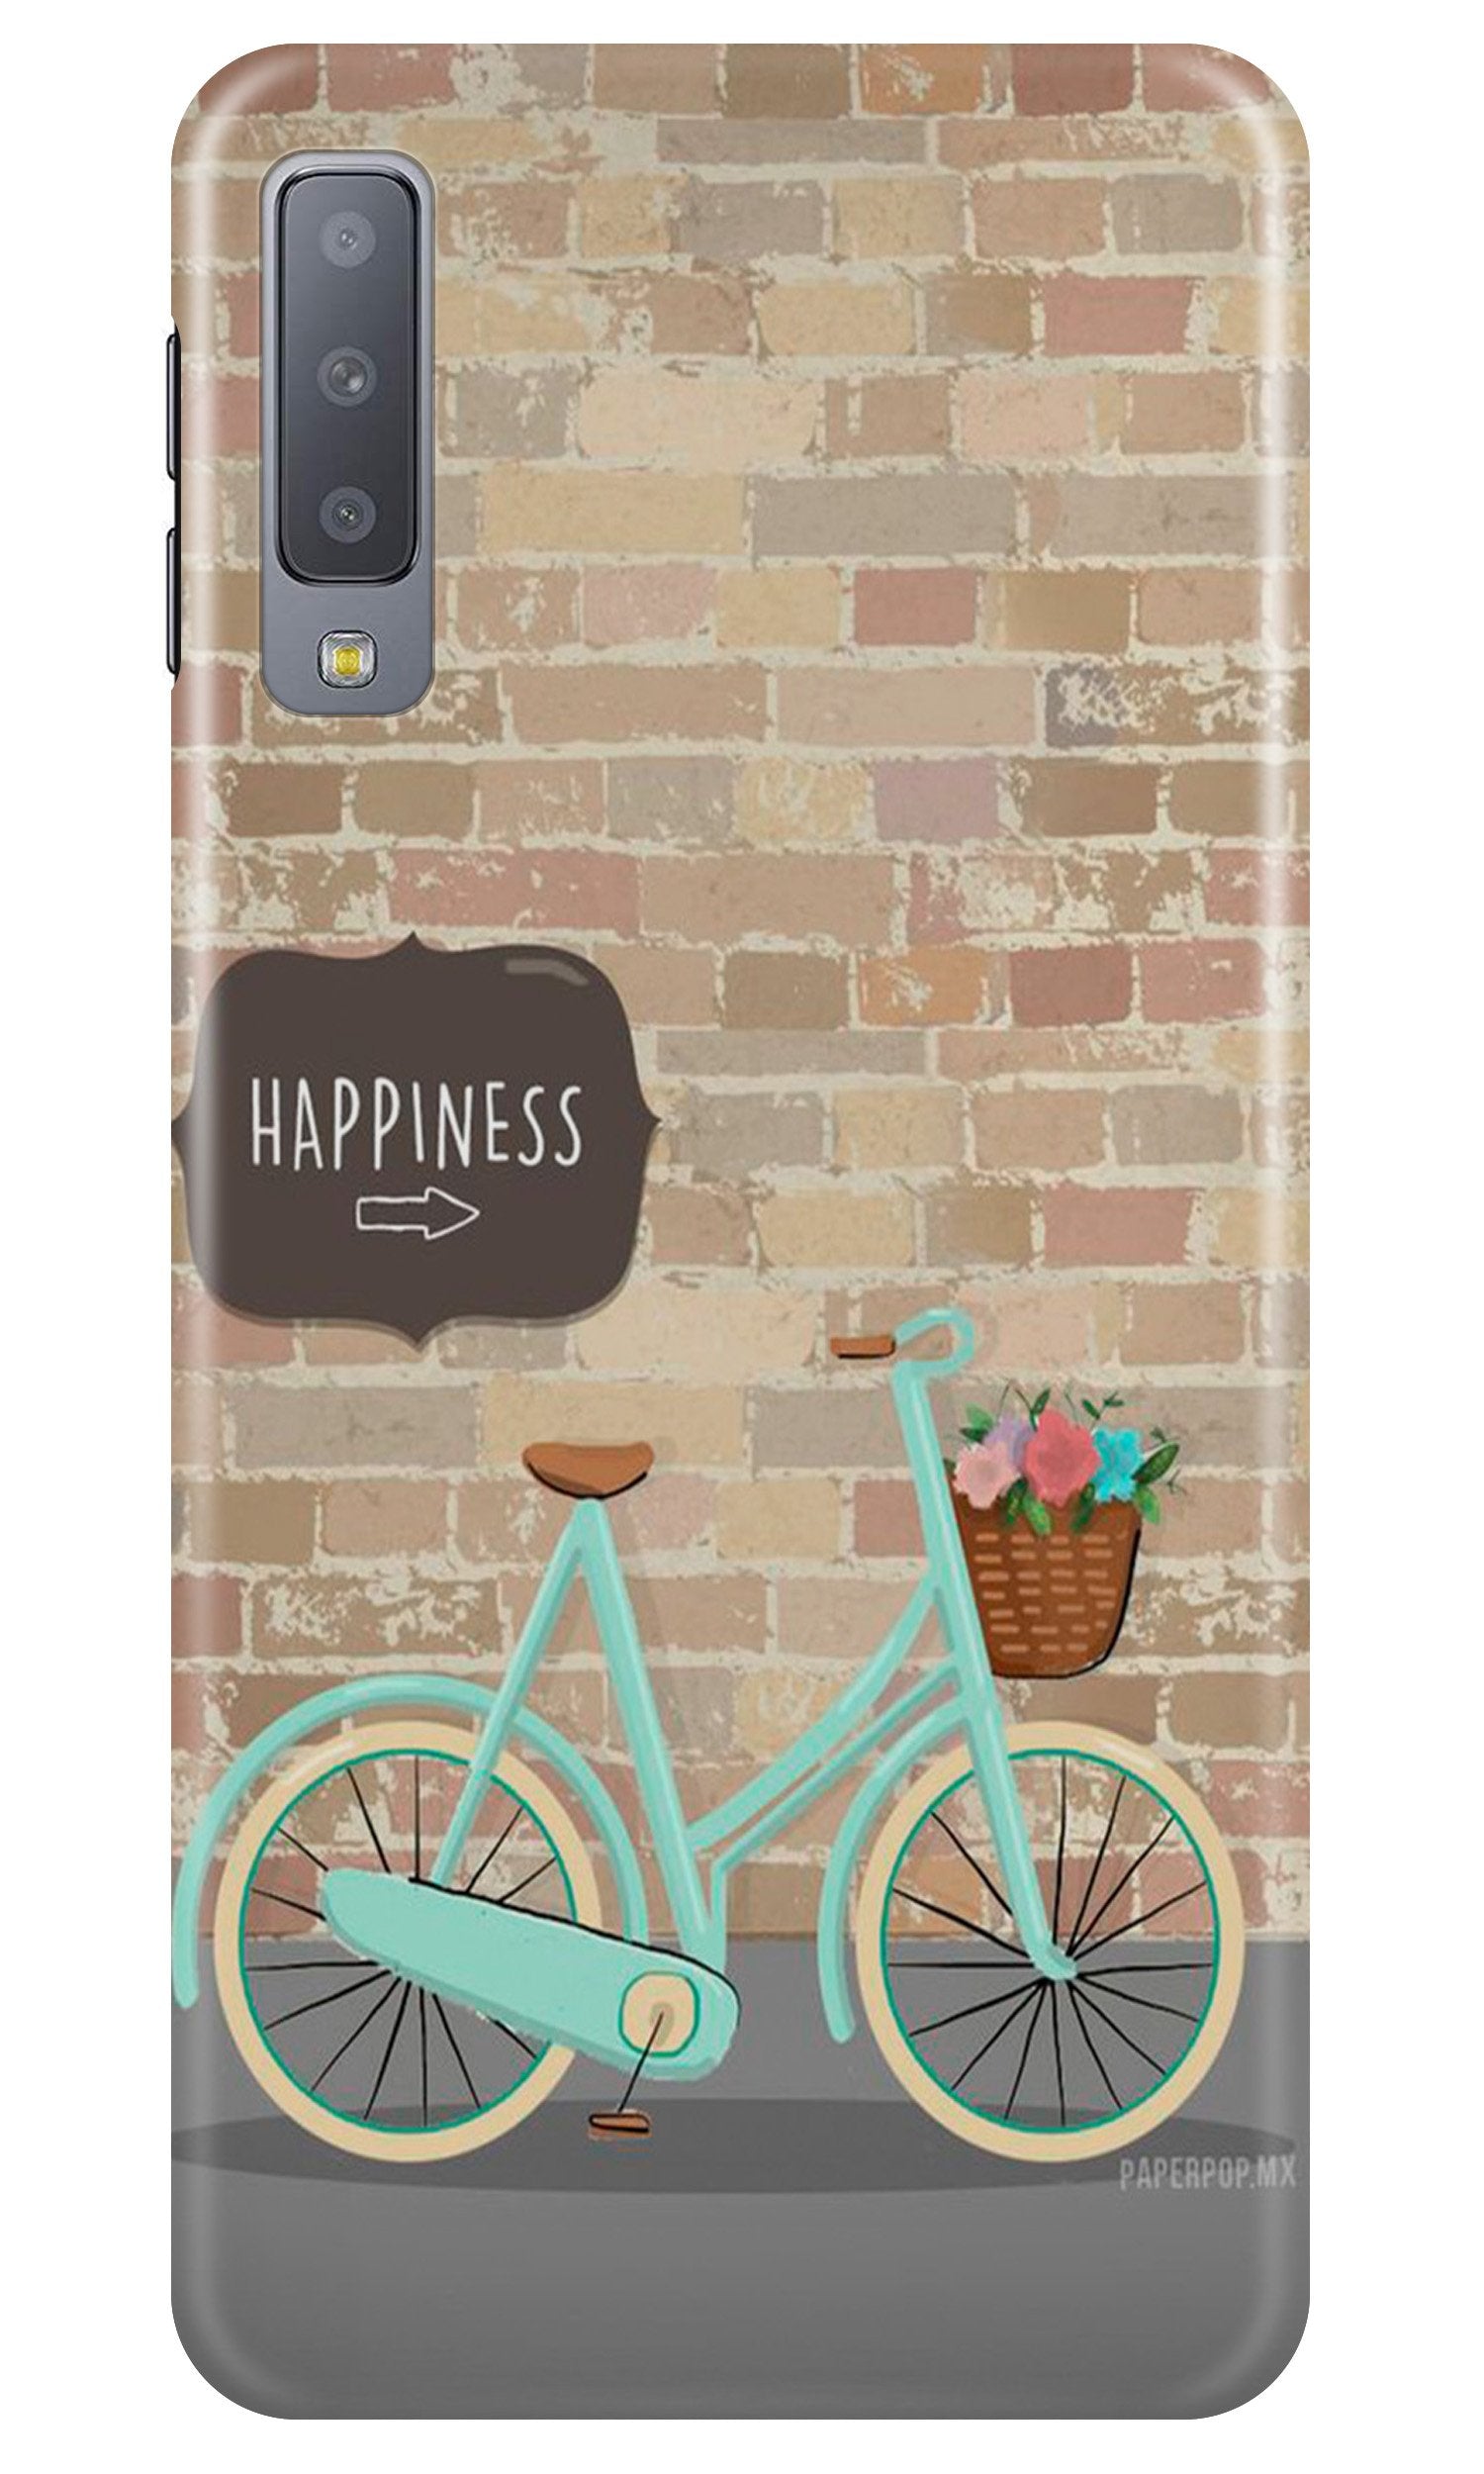 Happiness Case for Galaxy A7 (2018)